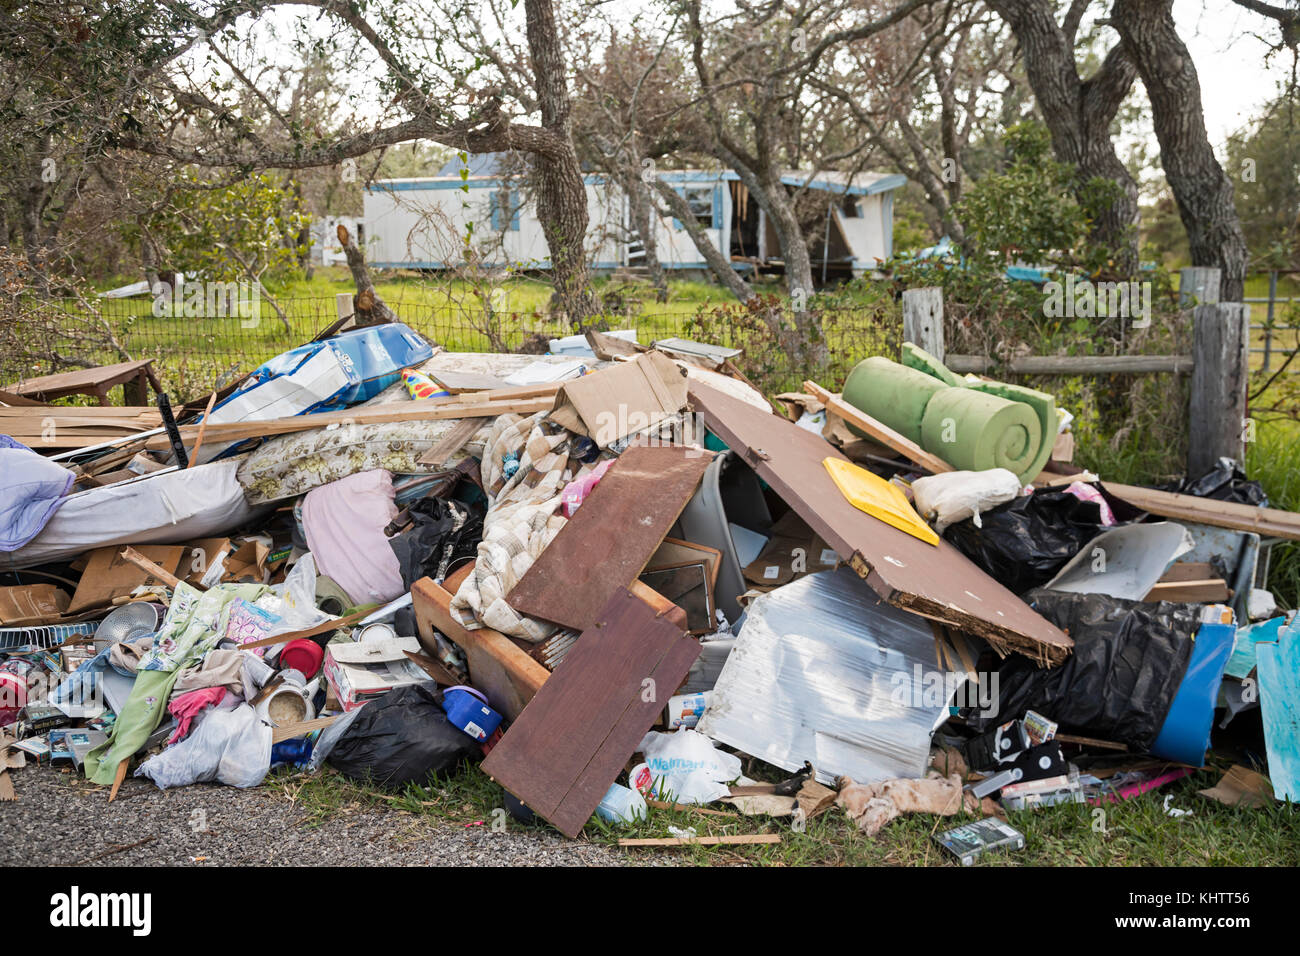 Rockport, Texas - Hurricane Harvey debris in front of a severely damaged mobile home. Stock Photo